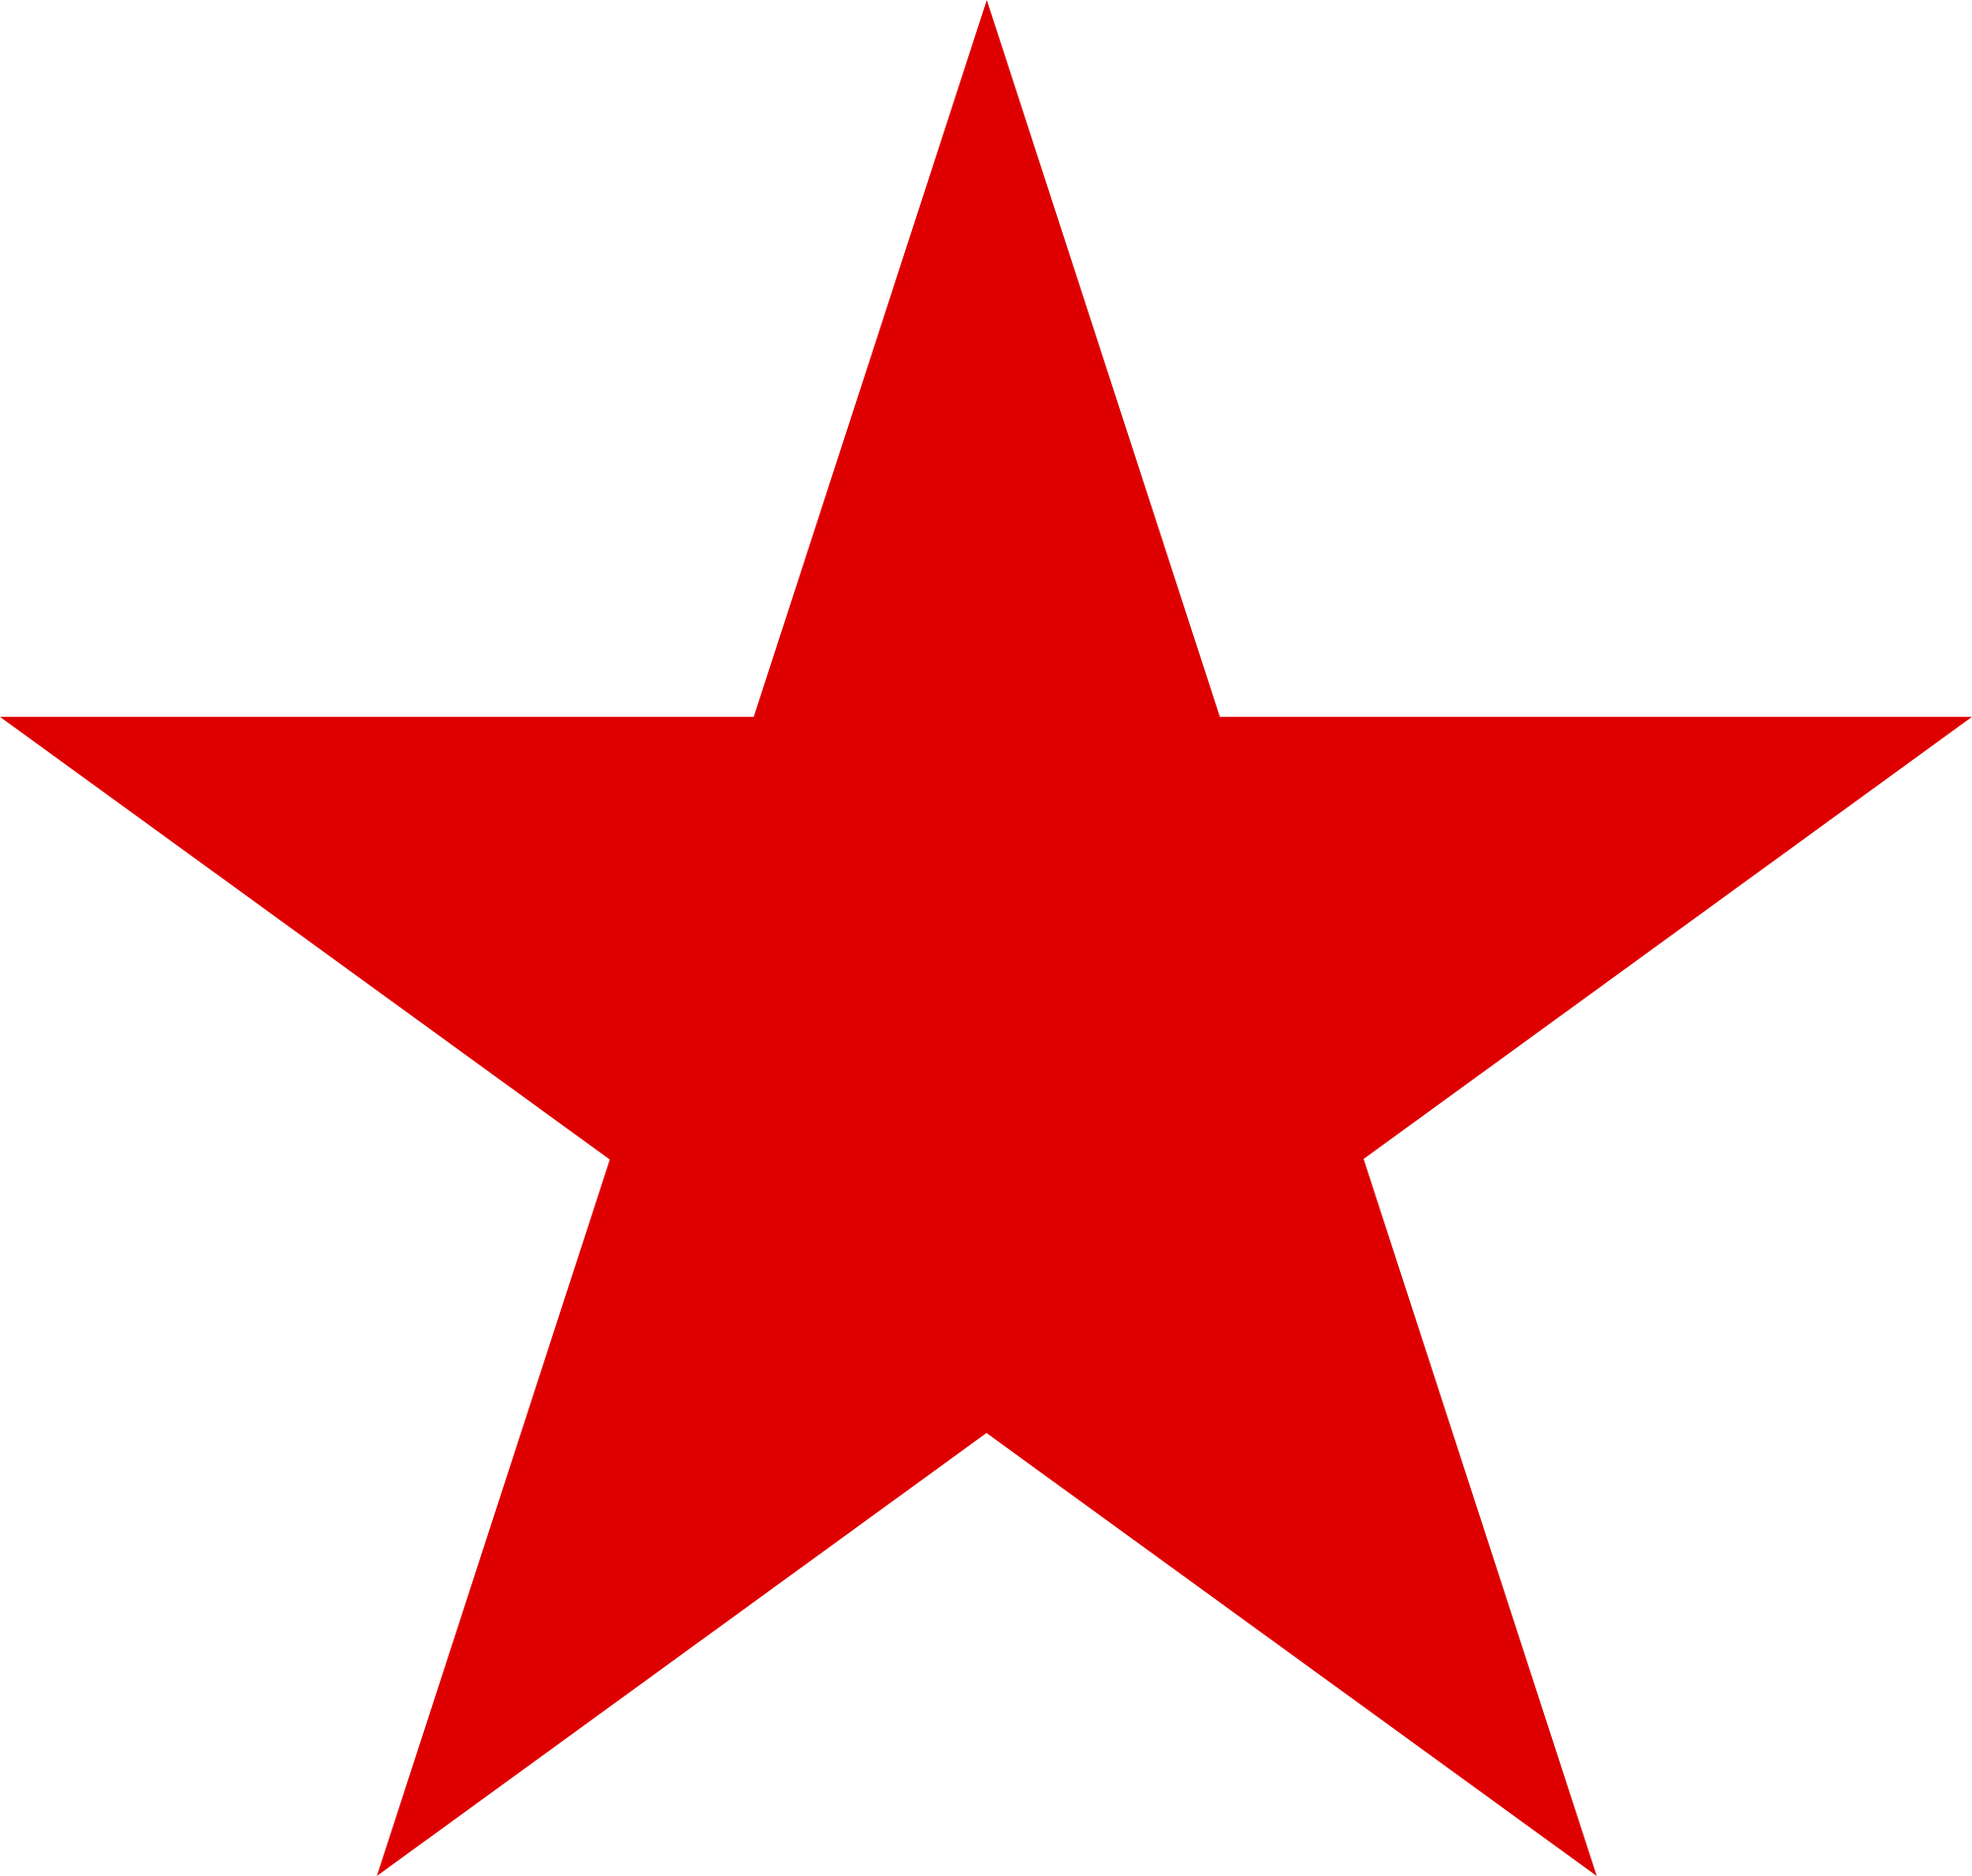 Soviet Air Forces - Wikipedia, the free encyclopedia